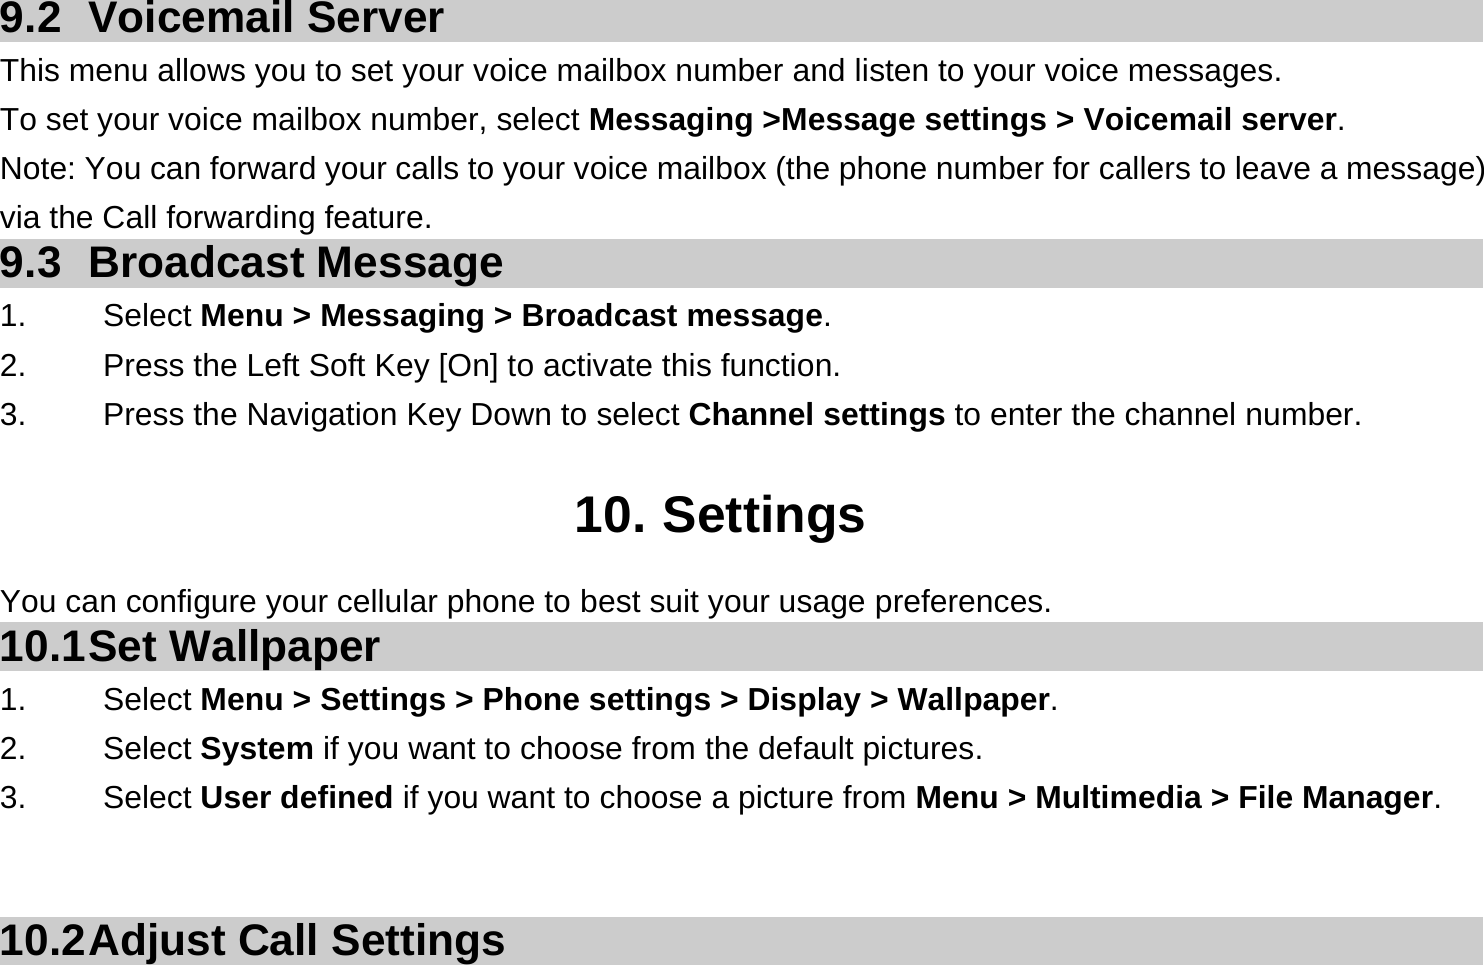 9.2 Voicemail Server This menu allows you to set your voice mailbox number and listen to your voice messages. To set your voice mailbox number, select Messaging &gt;Message settings &gt; Voicemail server. Note: You can forward your calls to your voice mailbox (the phone number for callers to leave a message) via the Call forwarding feature. 9.3 Broadcast Message 1.   Select Menu &gt; Messaging &gt; Broadcast message. 2.  Press the Left Soft Key [On] to activate this function. 3.  Press the Navigation Key Down to select Channel settings to enter the channel number.  10. Settings You can configure your cellular phone to best suit your usage preferences. 10.1 Set  Wallpaper 1.   Select Menu &gt; Settings &gt; Phone settings &gt; Display &gt; Wallpaper. 2.   Select System if you want to choose from the default pictures. 3.   Select User defined if you want to choose a picture from Menu &gt; Multimedia &gt; File Manager.    10.2 Adjust Call Settings 